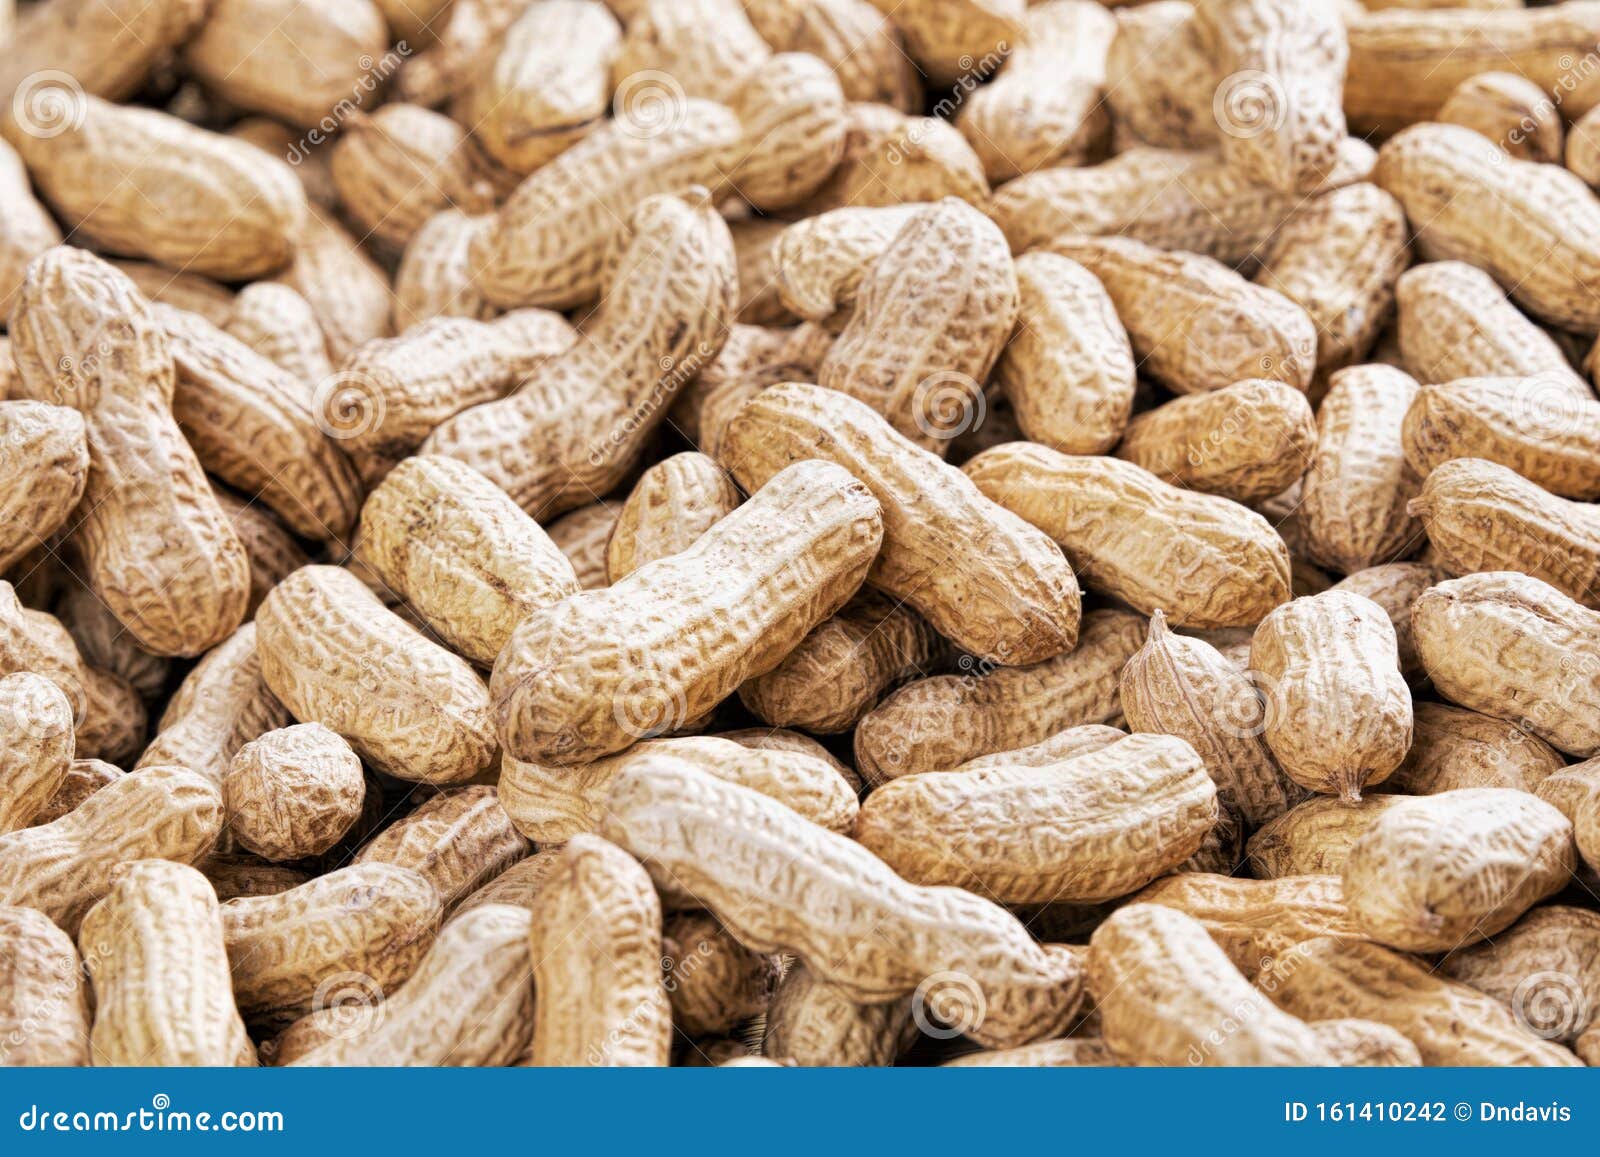 peanuts, a great comfort food and snack